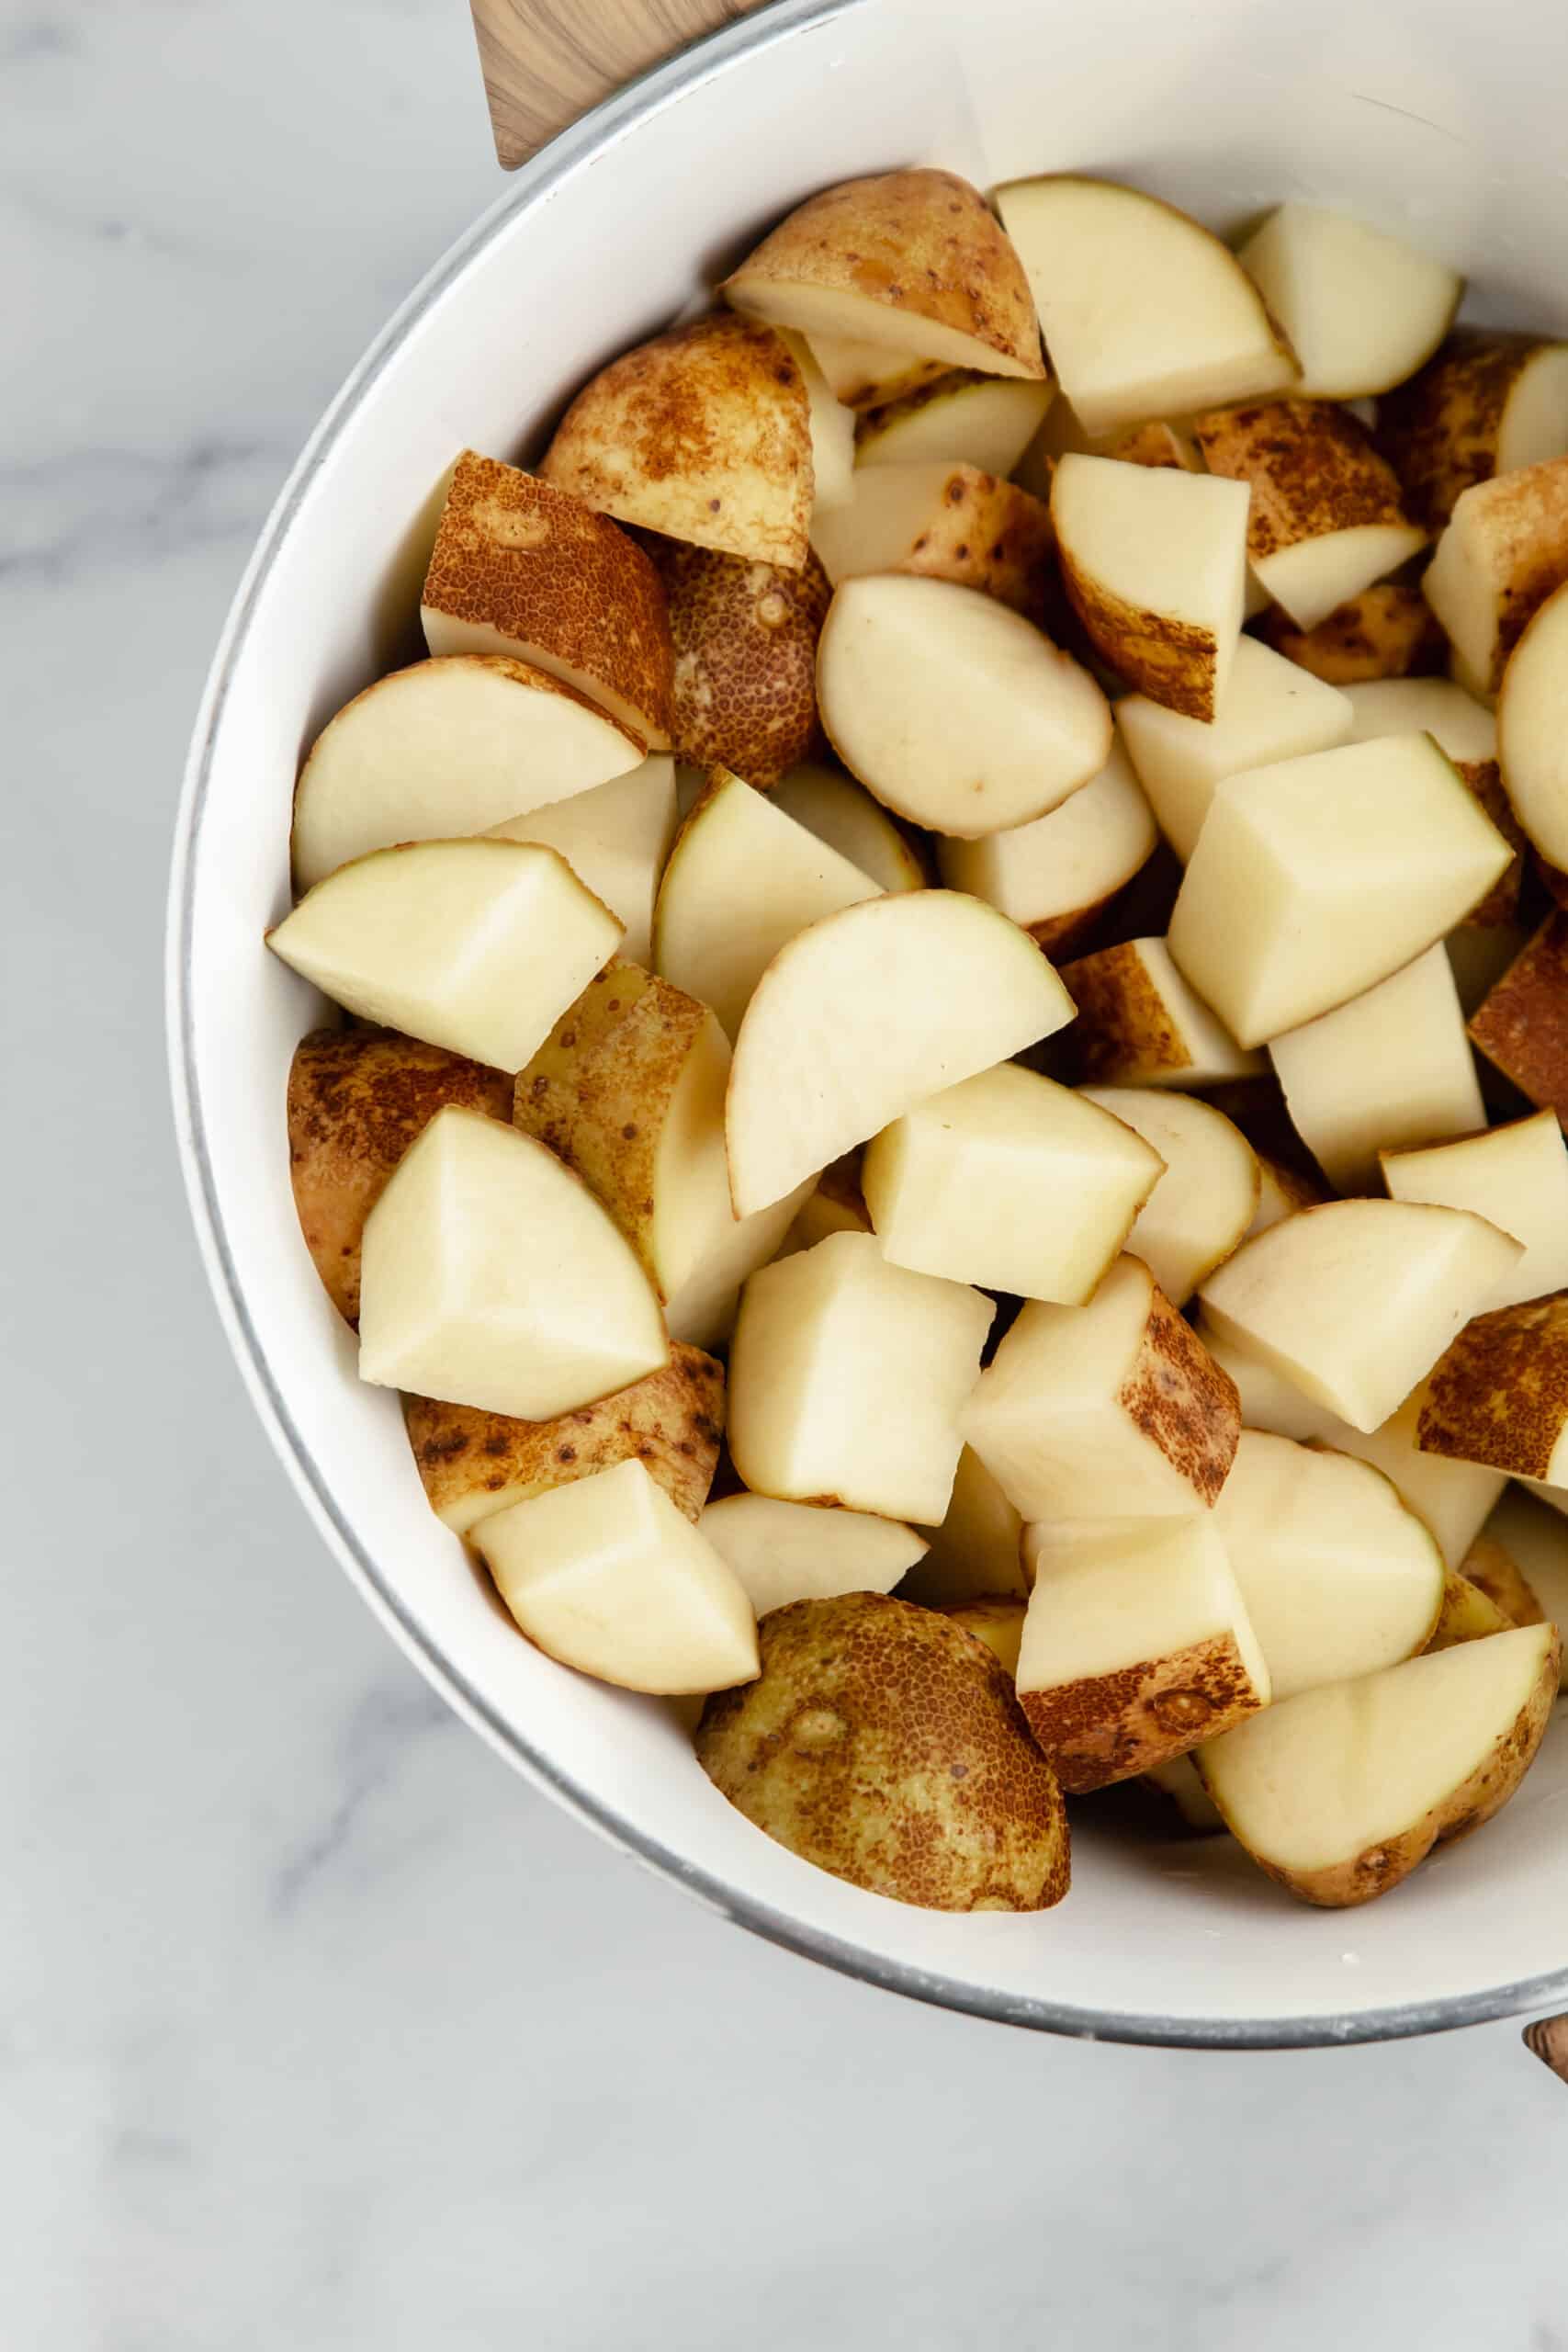 A bowl of diced potatoes.